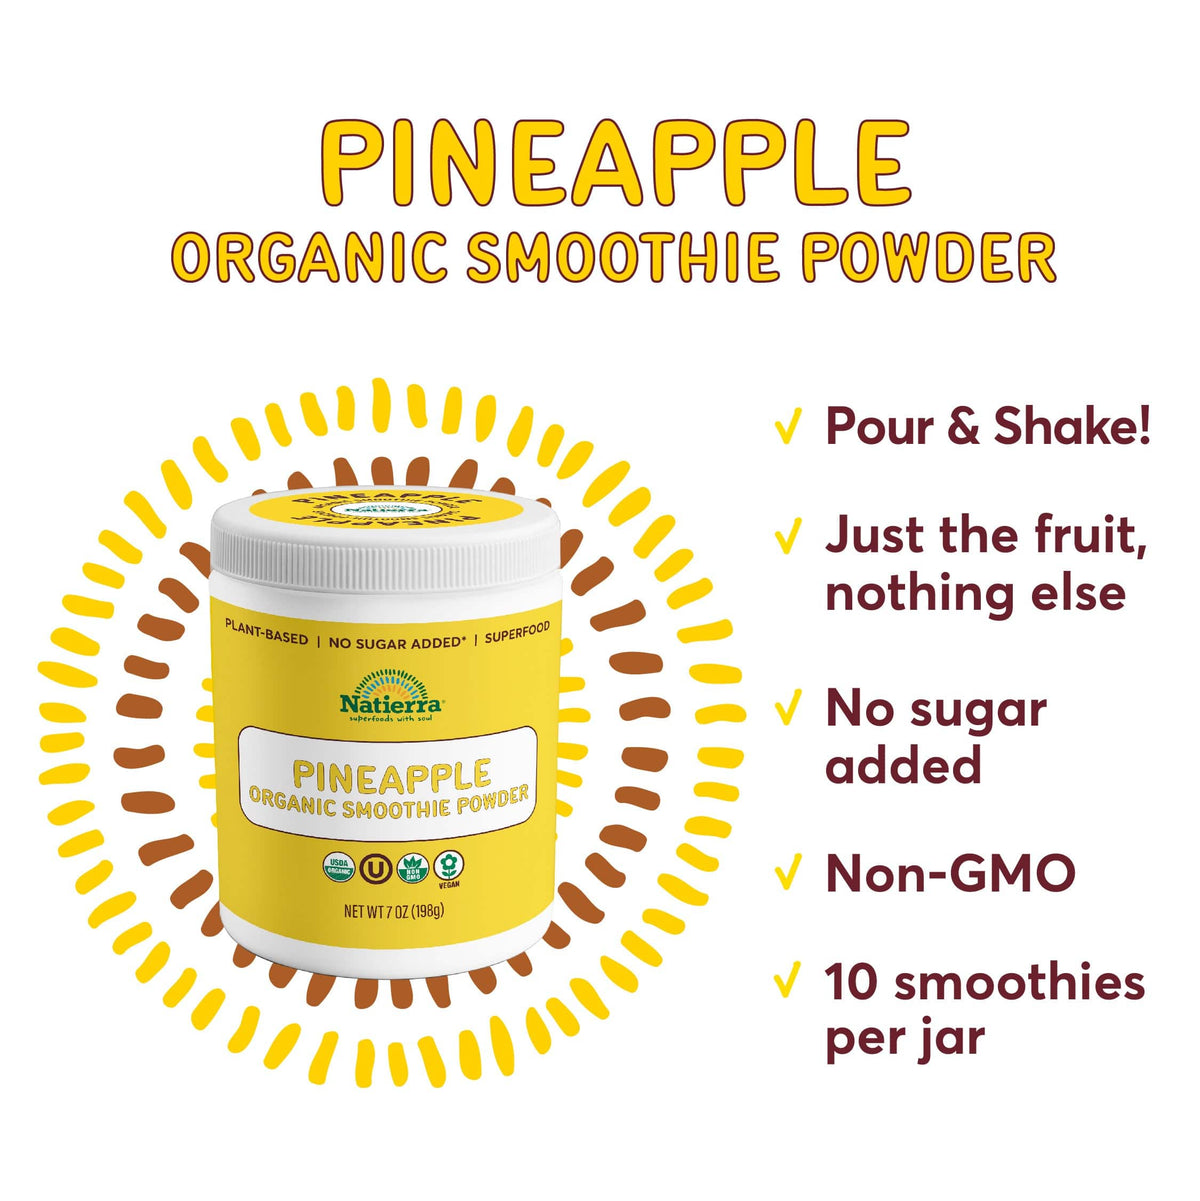 A jar of Natierra Pineapple Organic Smoothie Powder next to list of main product claims